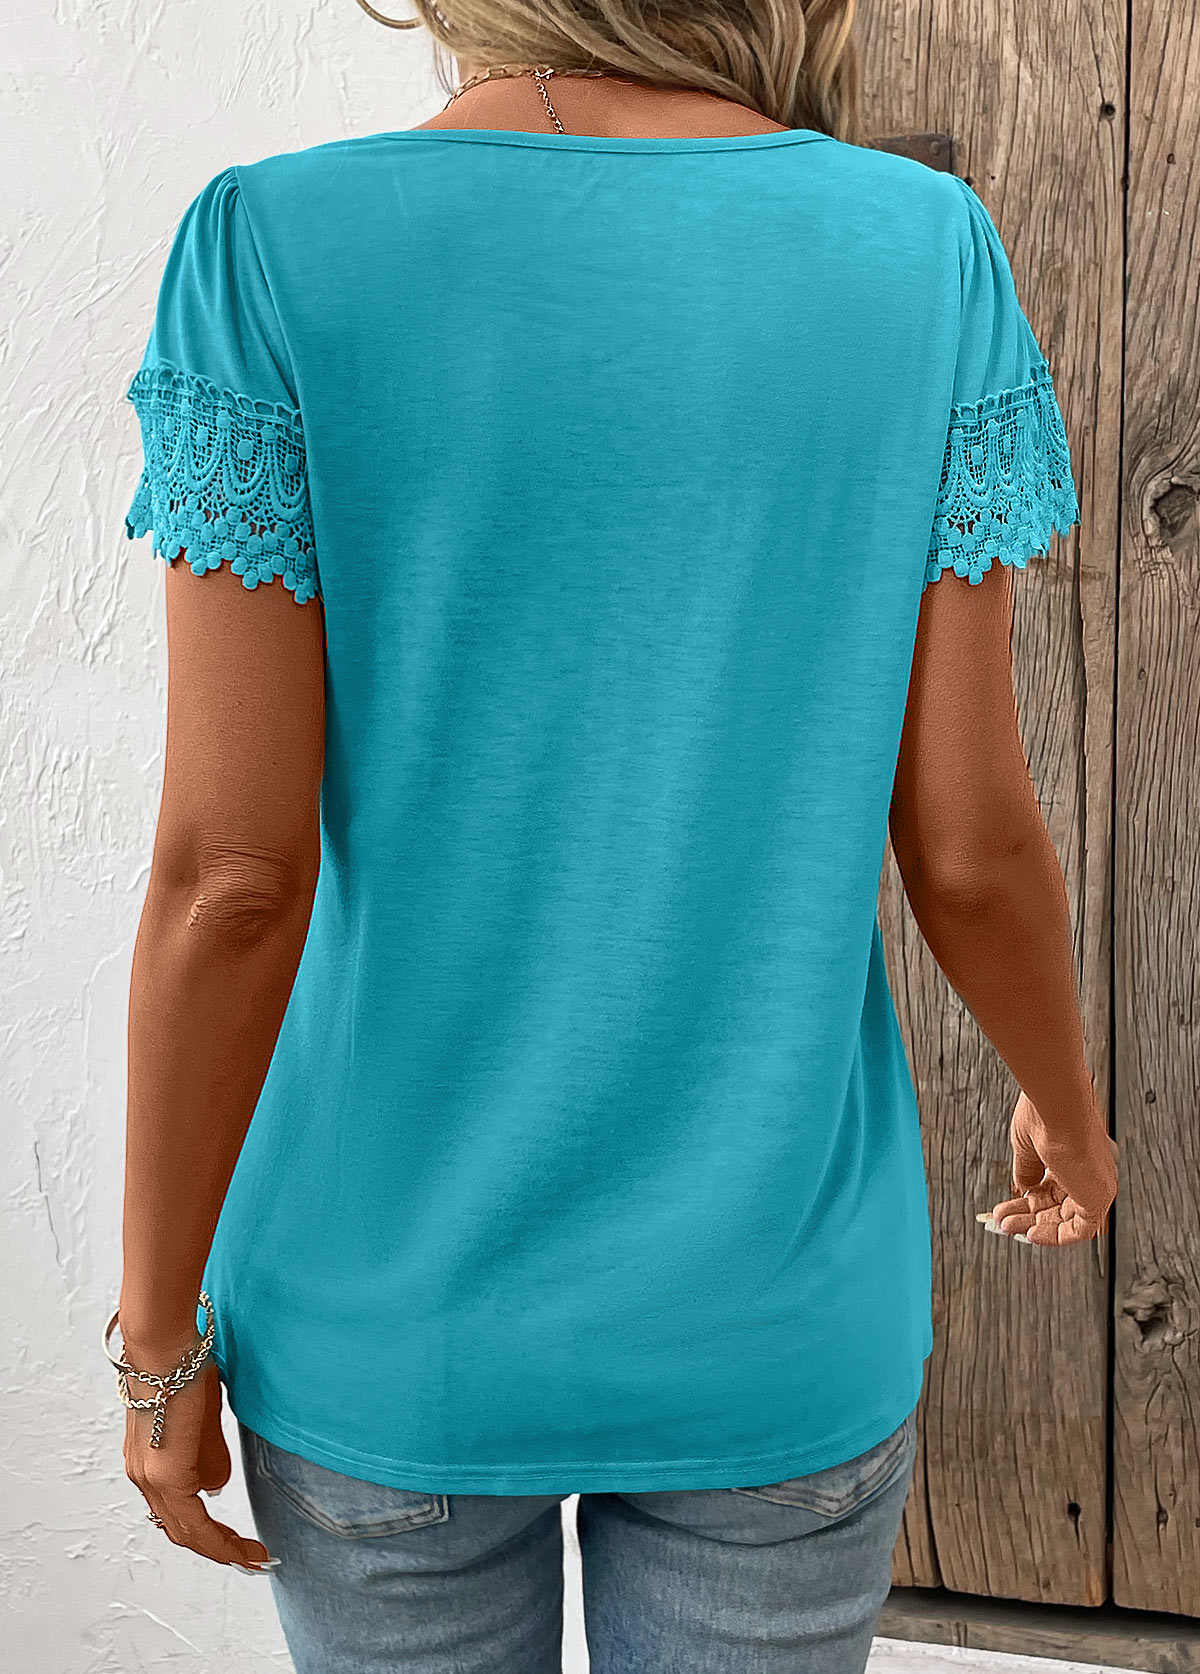 Patchwork Peacock Blue Short Sleeve Square Neck T Shirt